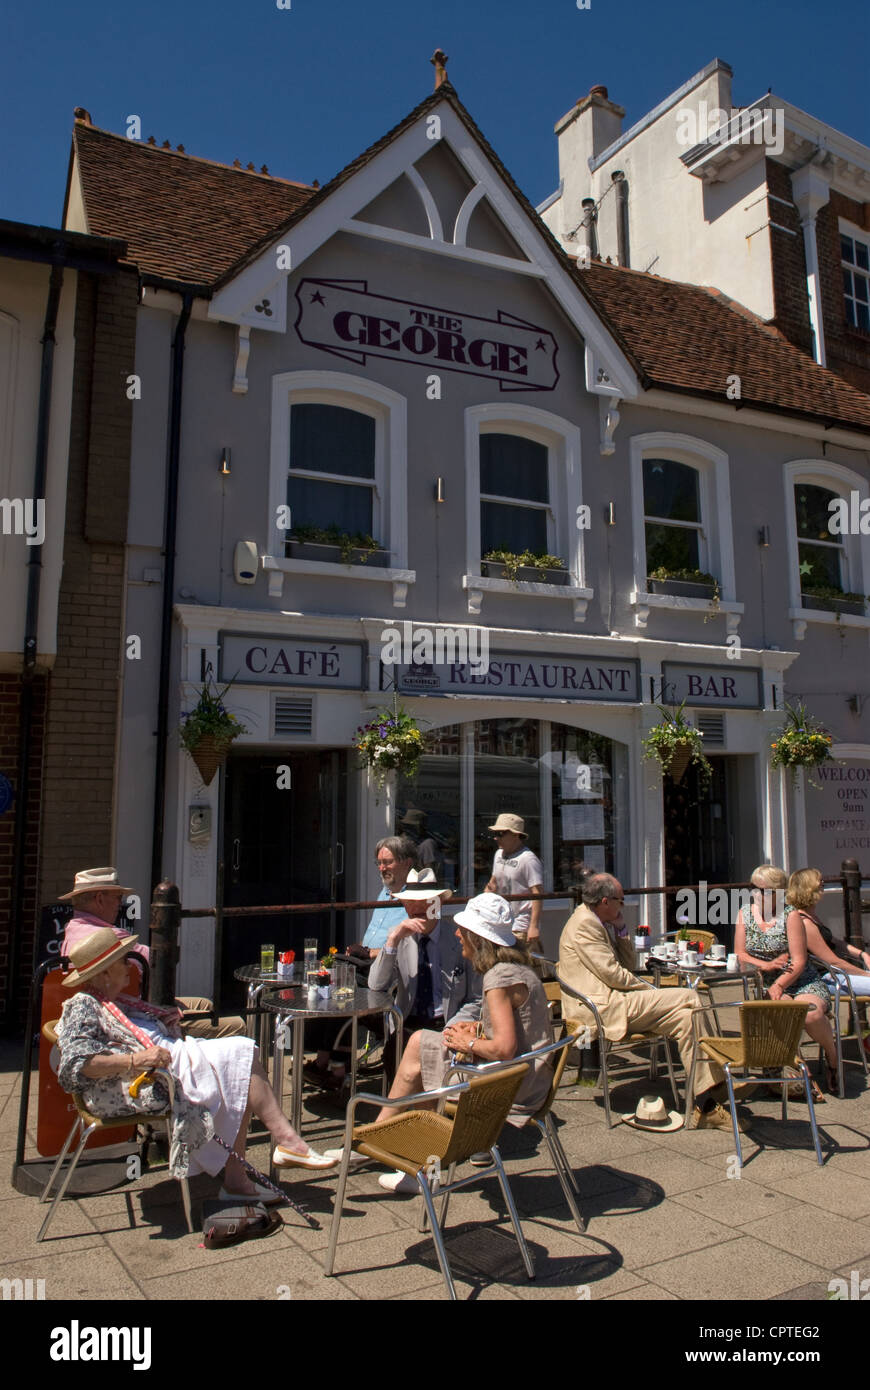 People enjoying a relaxing summer's day drink outside The George public house, Main Square, Petersfield, Hampshire, UK. Stock Photo